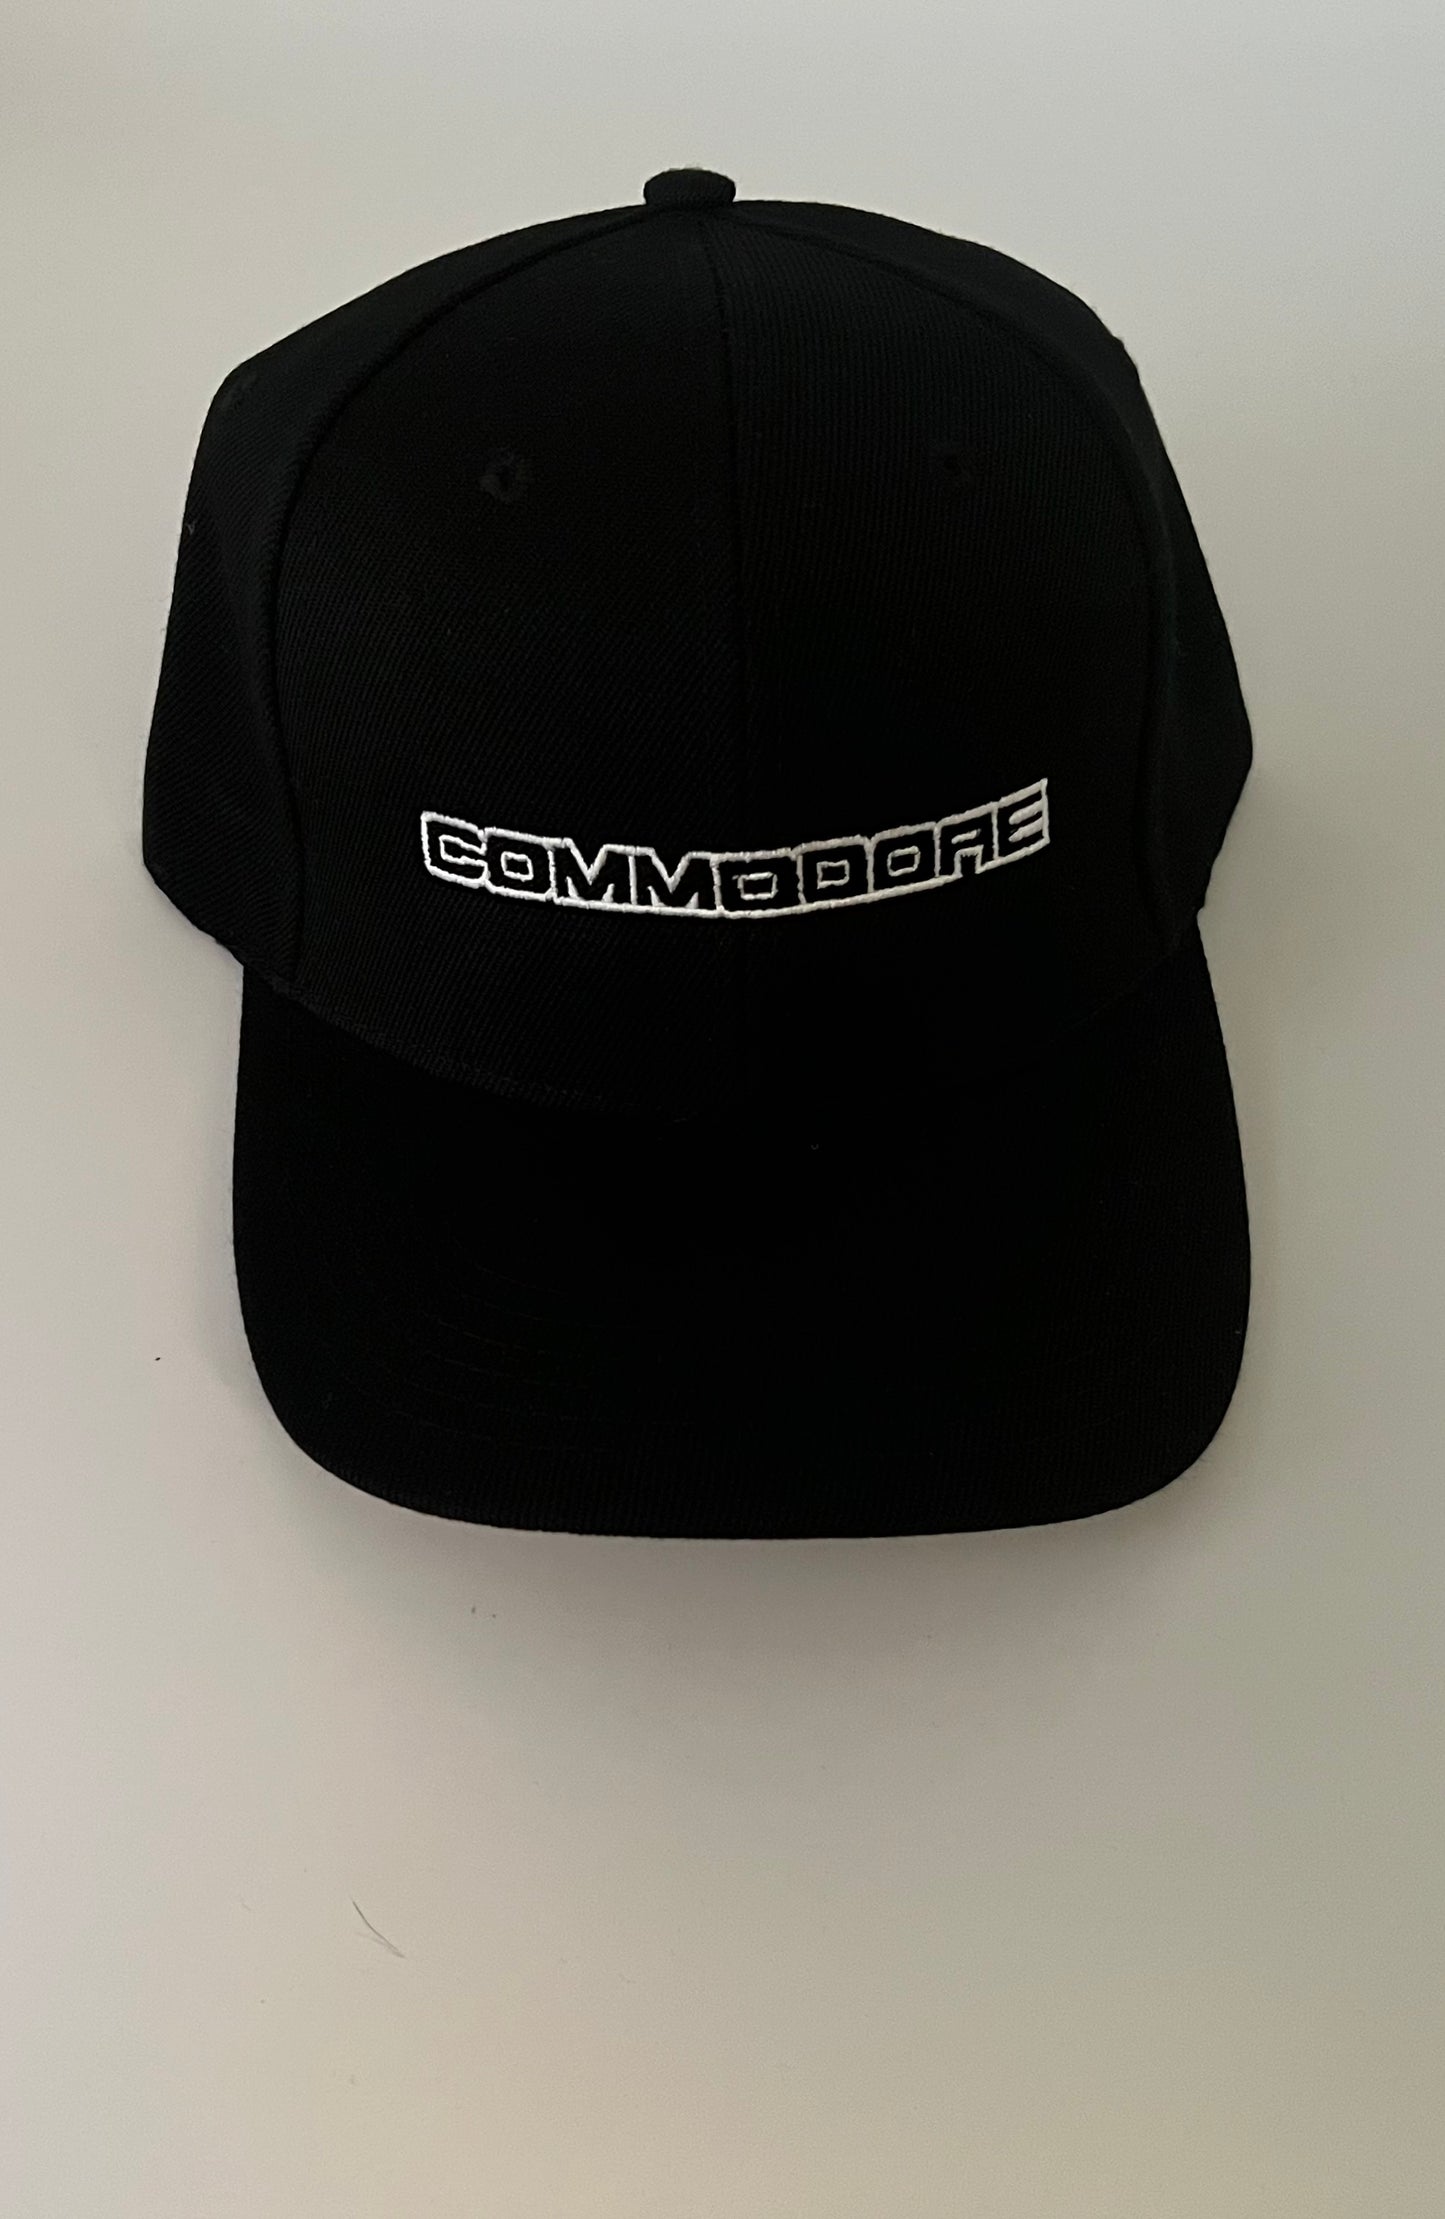 Commodore Embroidered Hat